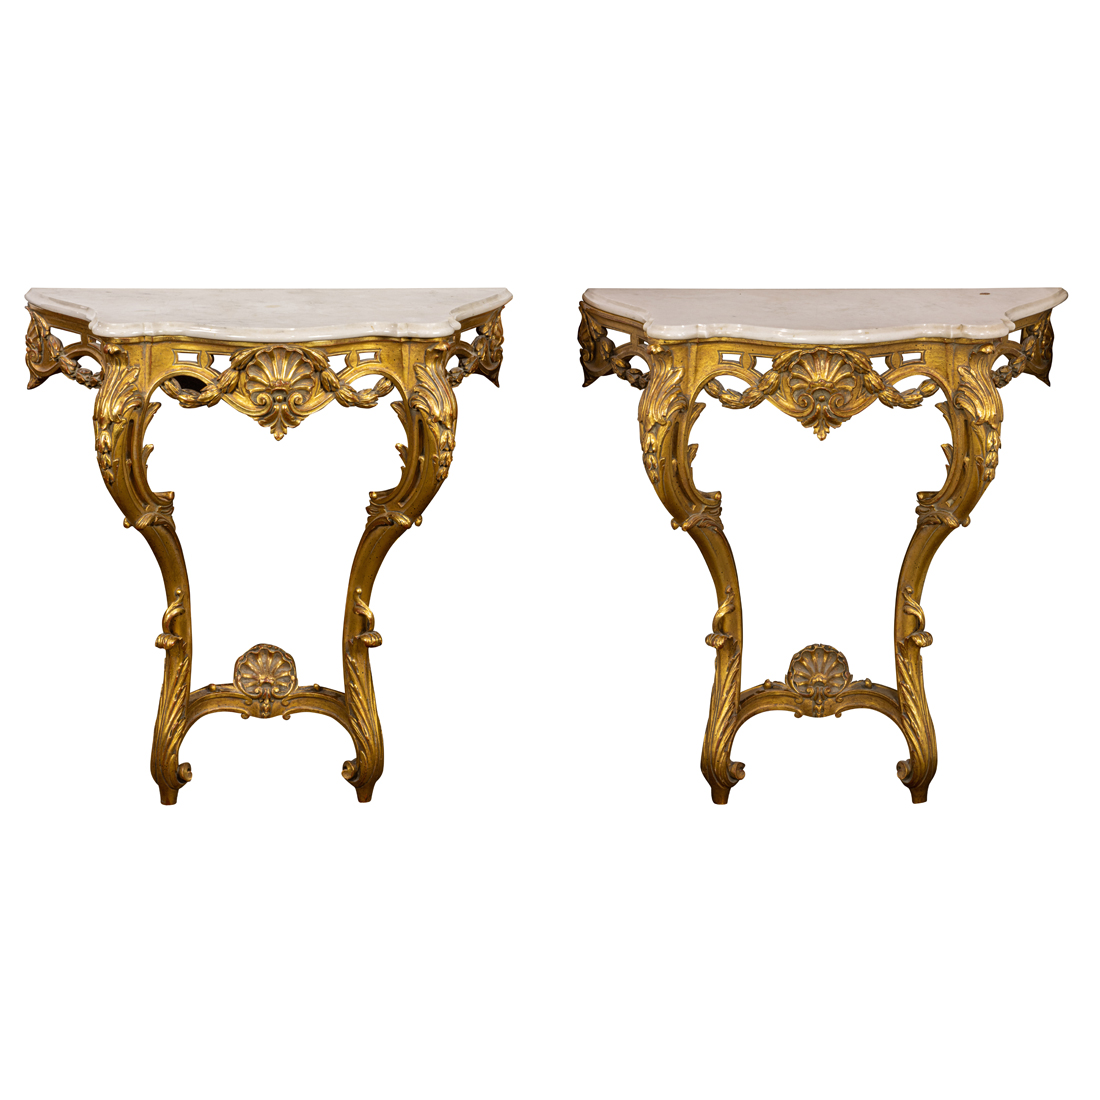 A PAIR OF ROCOCO STYLE GILTWOOD